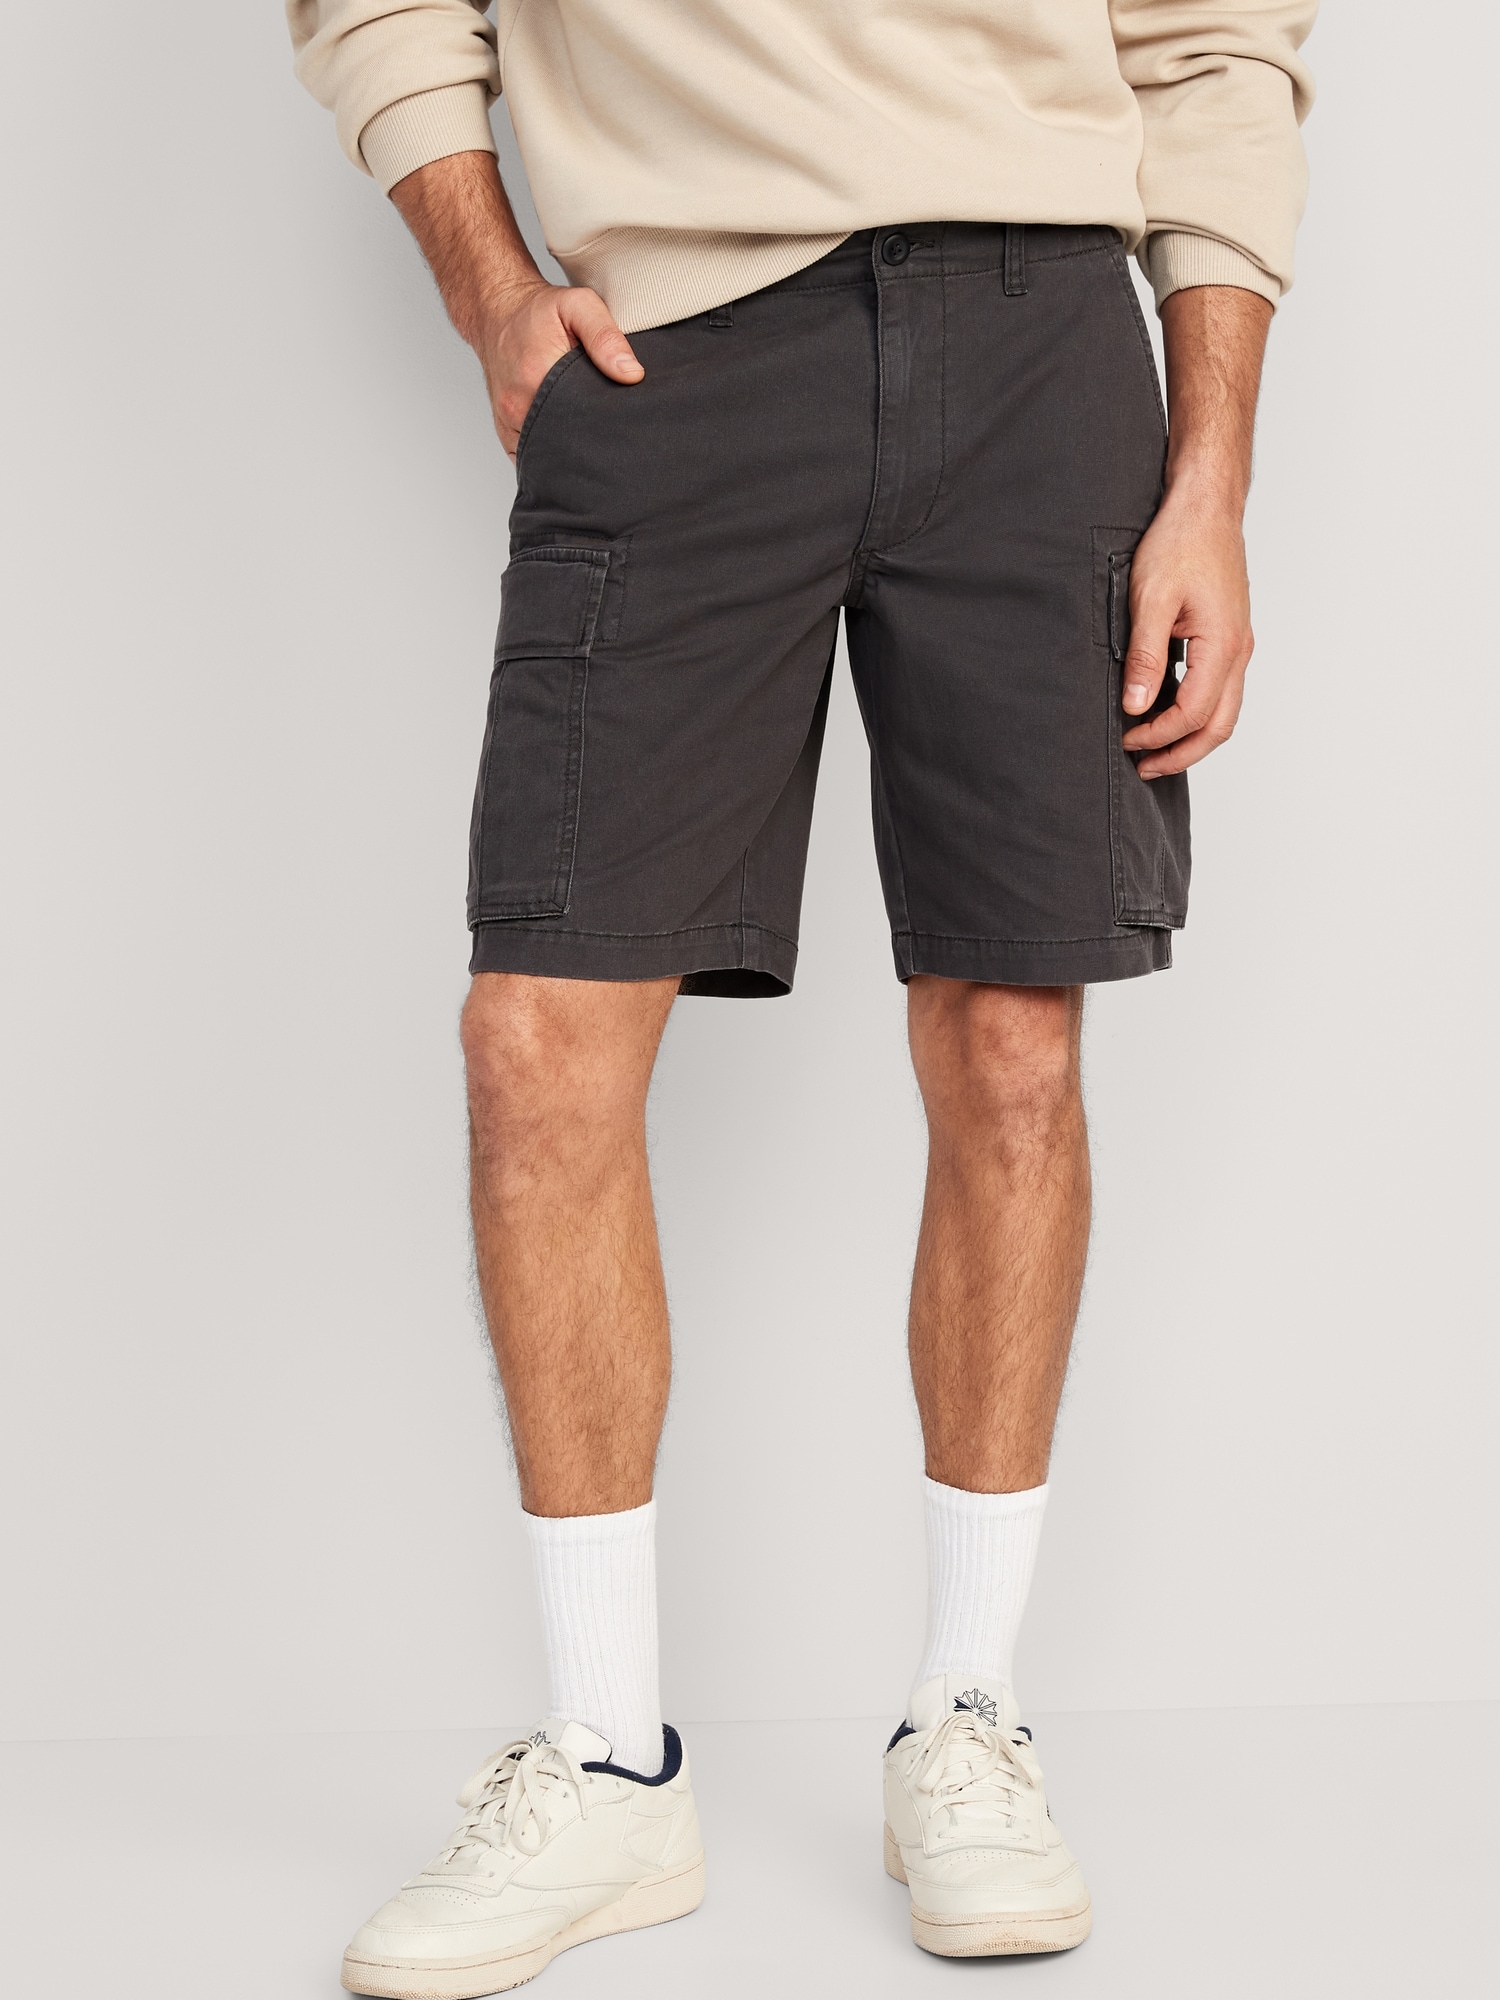 Relaxed Lived In Cargo Shorts For Men 10 Inch Inseam Old Navy